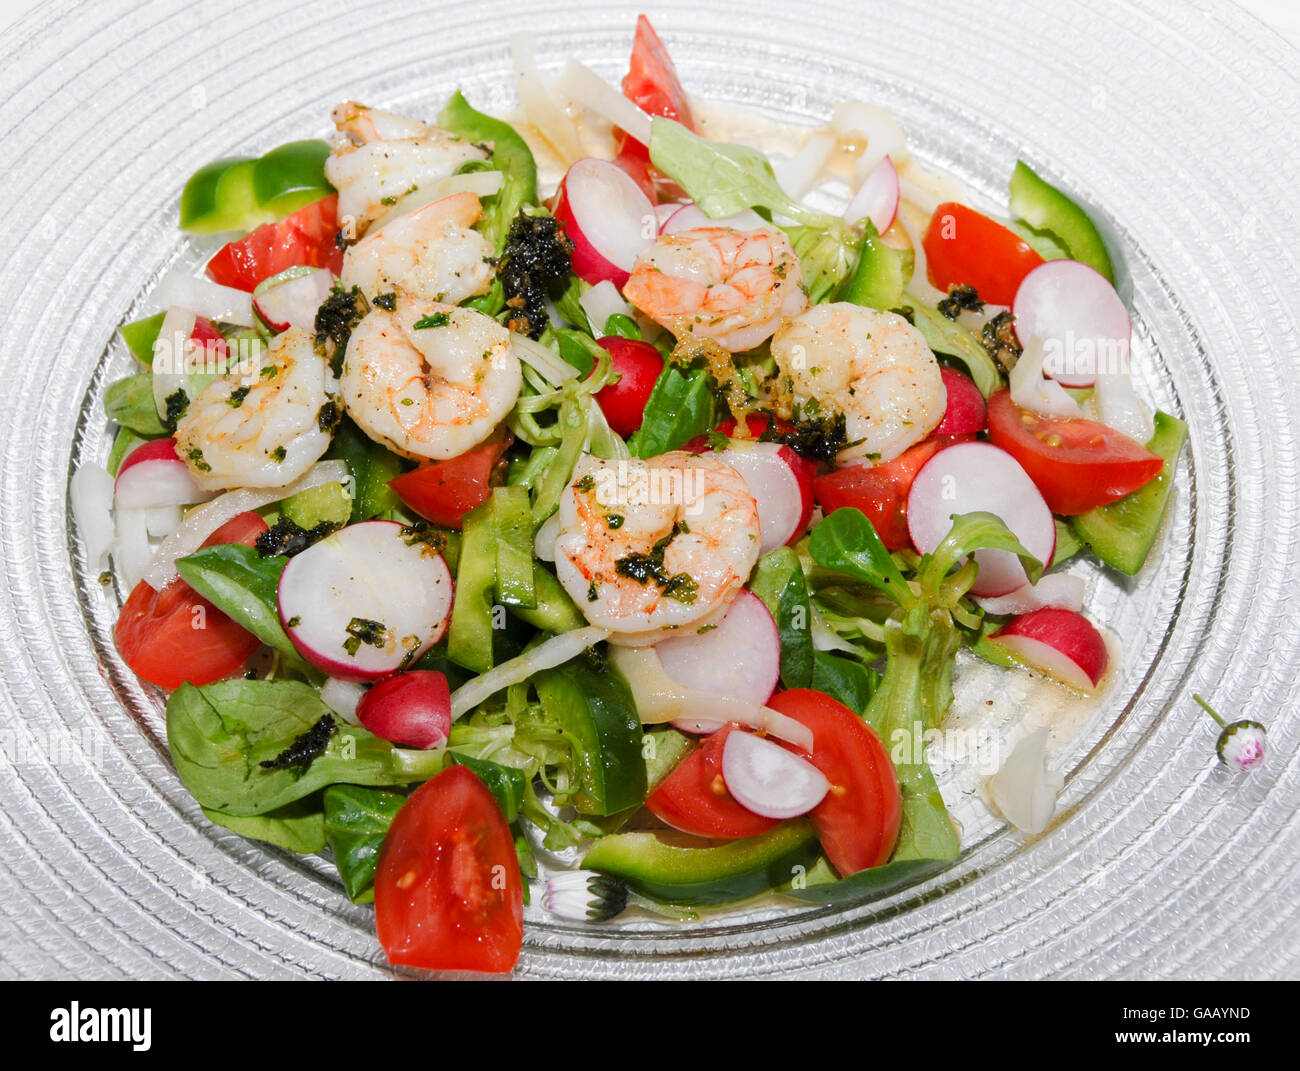 Salad with field salad, radish, pepper and shrimps Stock Photo